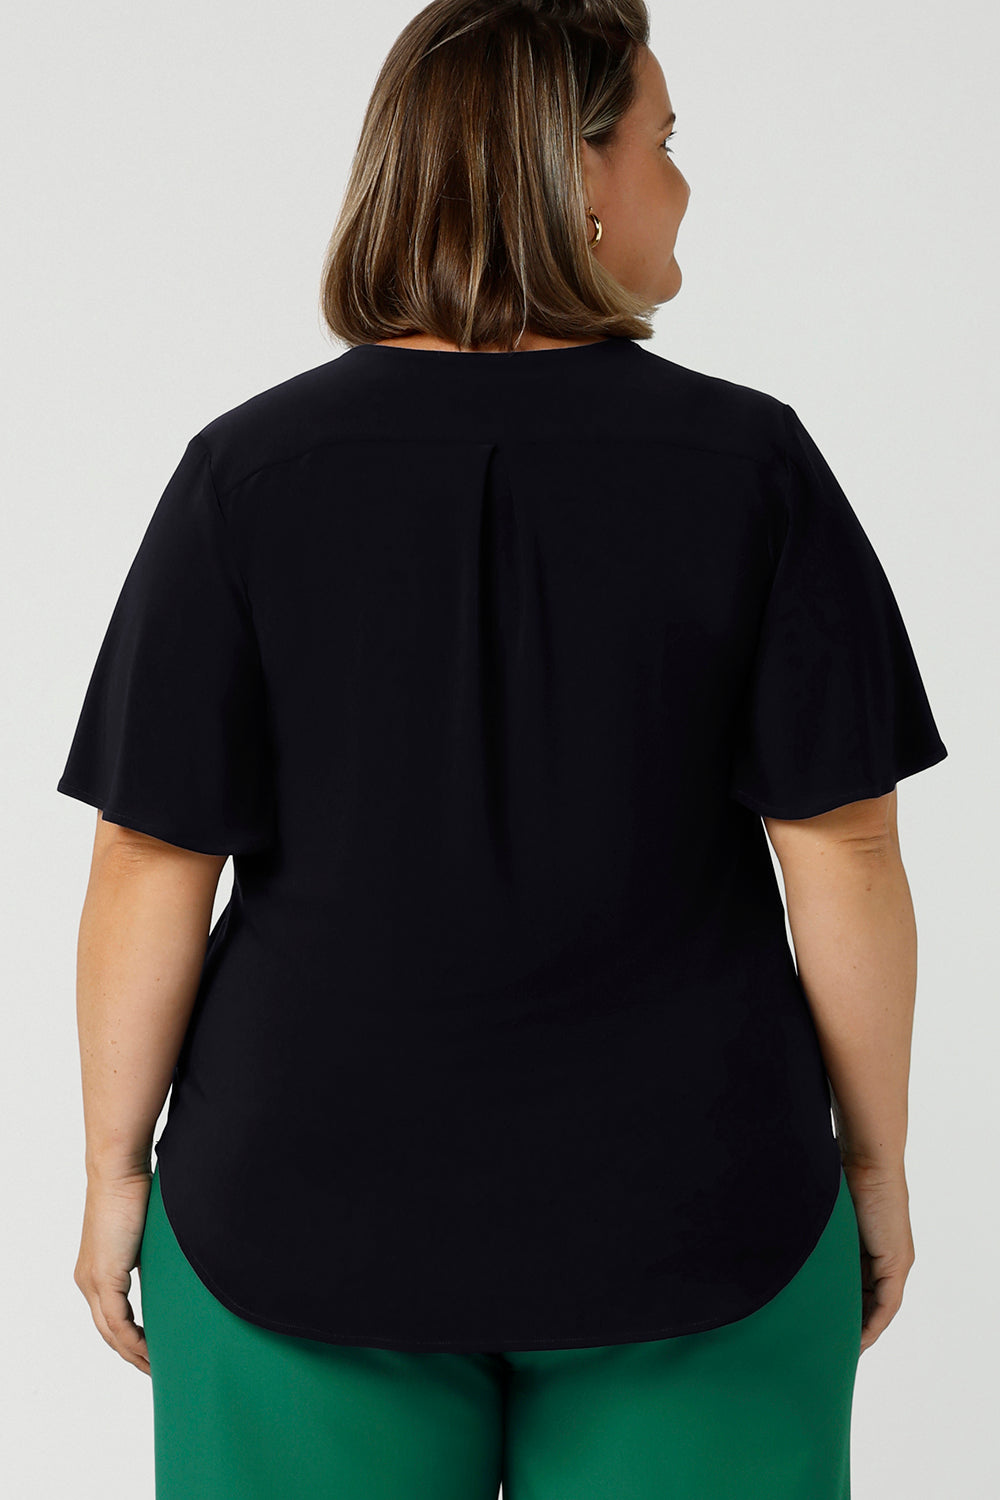 Back view of a semi-fitted, V-neck top with flutter sleeves in navy blue jersey. Made in Australia by women's clothing brand, Leina & Fleur , this plus size navy top is worn by a size 18, curvy woman. Great for capsule wardrobes, smart casual wear and as a work blouse, shop this top and other Australian-made women's clothing online in sizes 8 to 24 at Leina & Fleur's online fashion boutique!